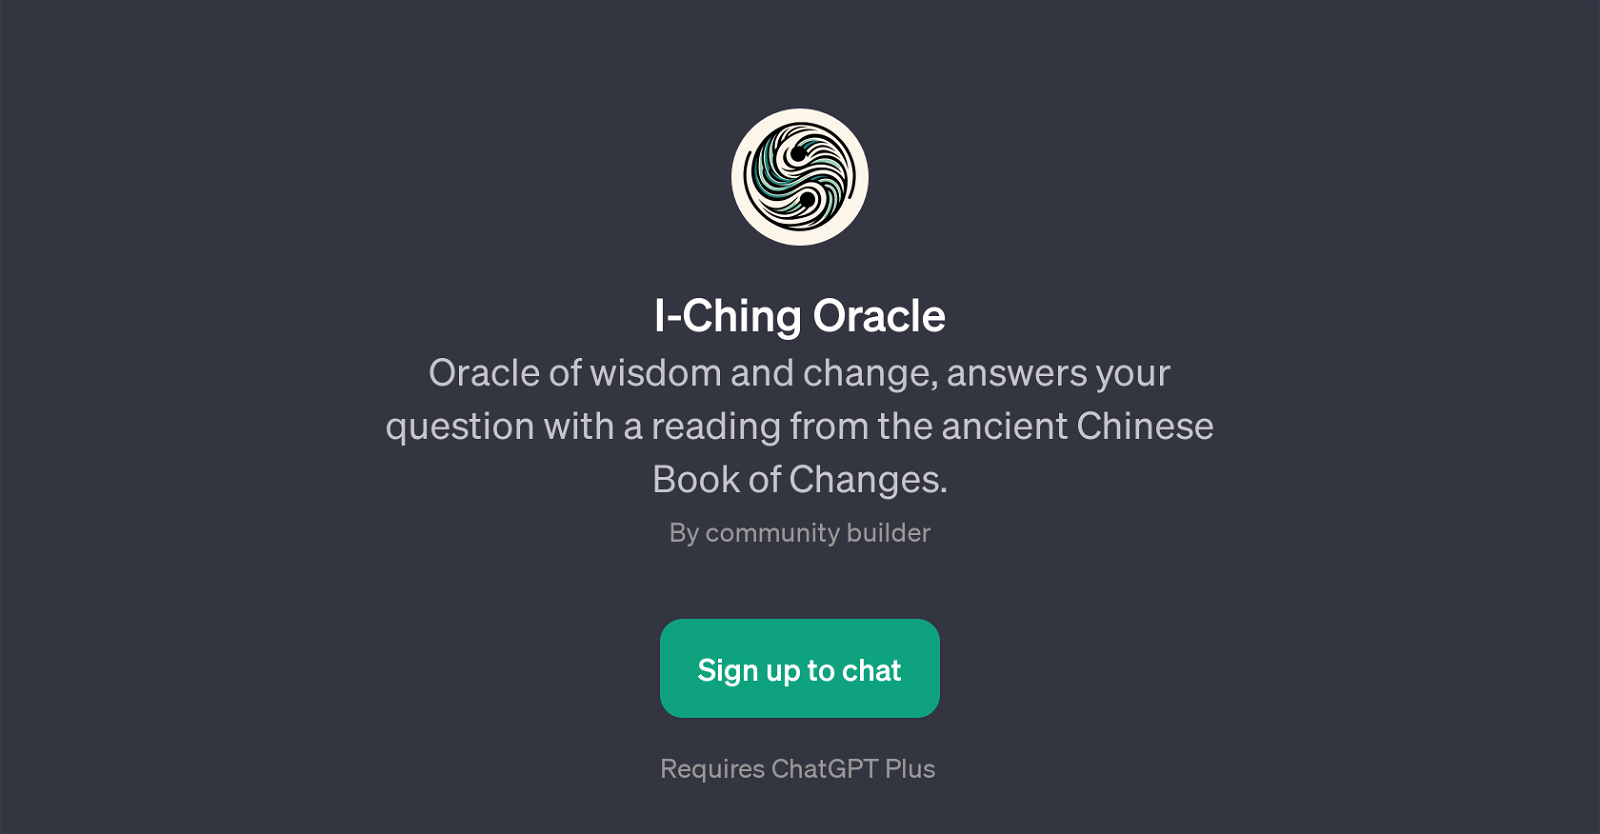 I-Ching Oracle website